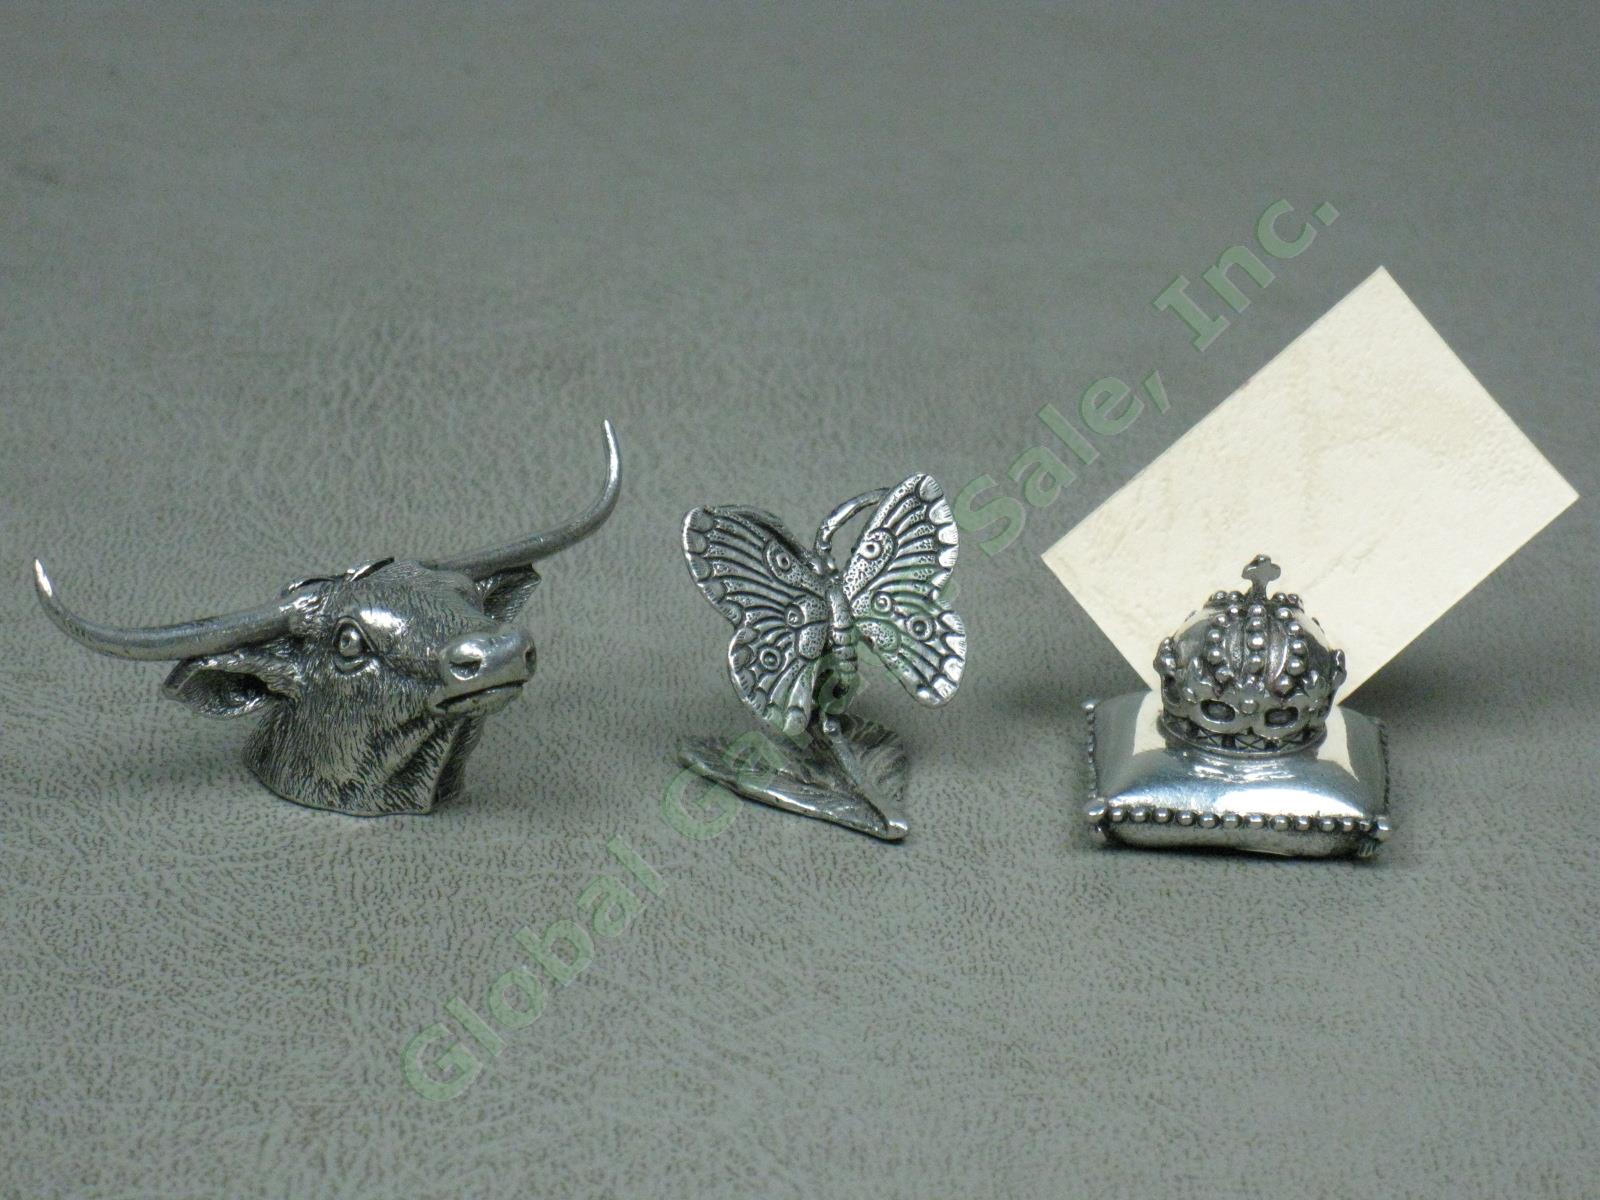 143 NEW Pewter Placecard Name Card Holder Lot Cherub Butterfly Shell Pineapple + 3